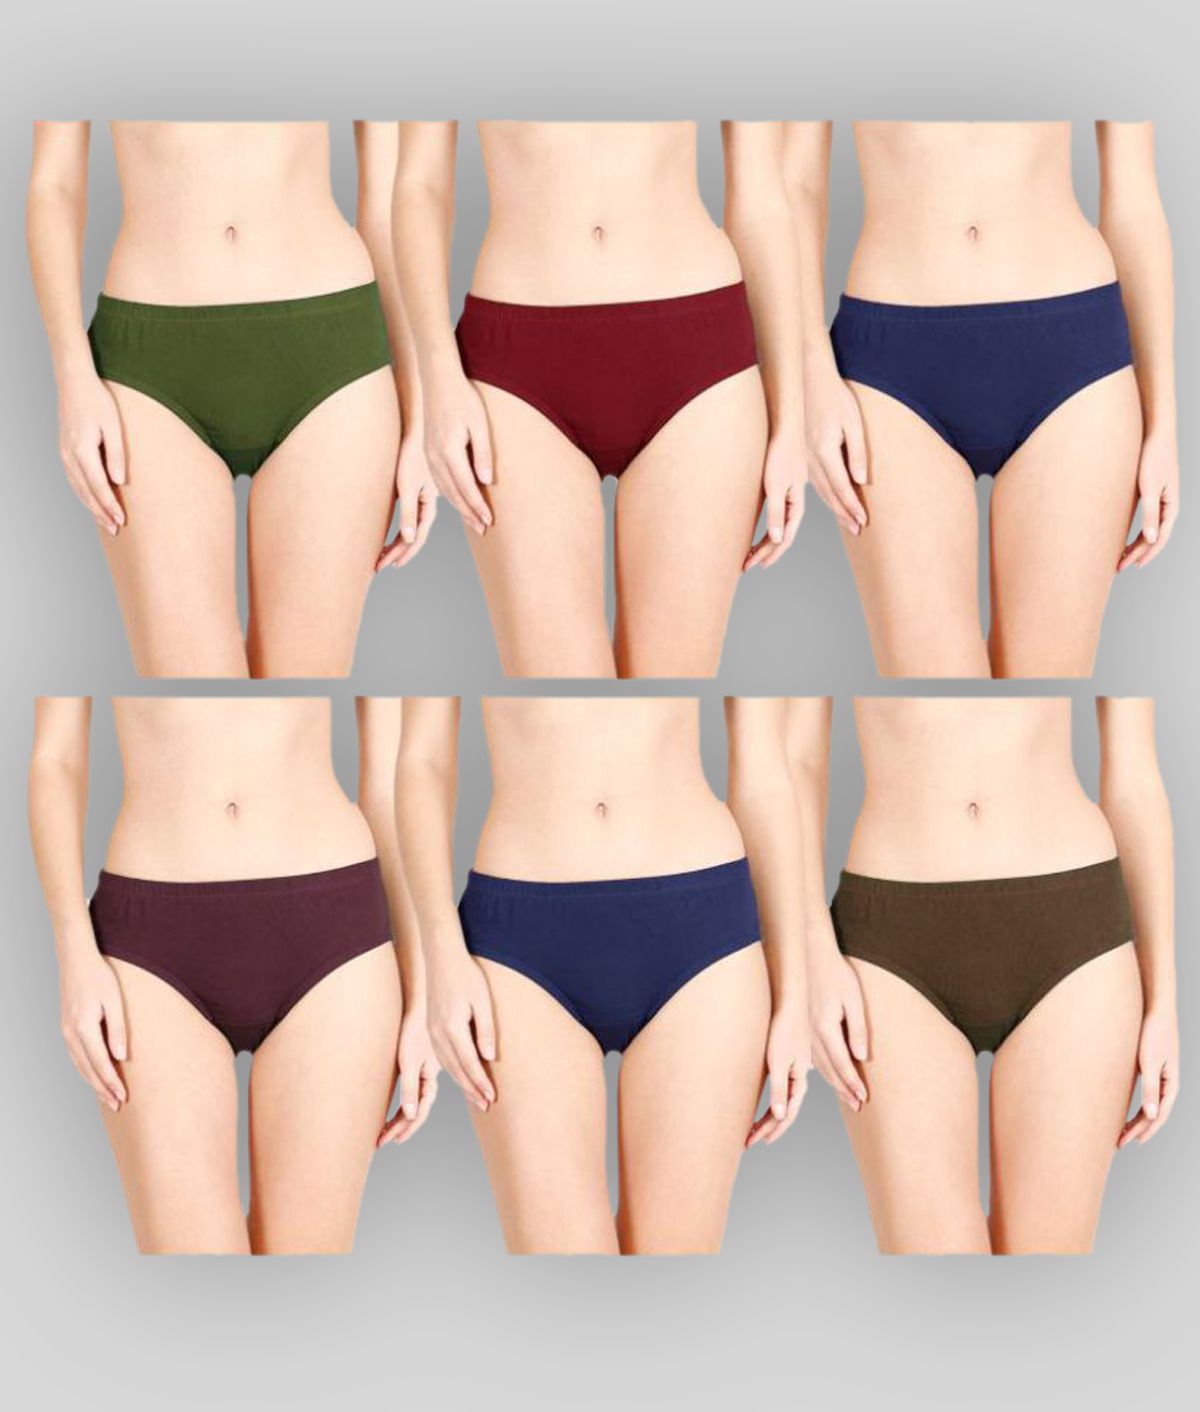     			Rupa - Multicolor Cotton Solid Women's Briefs ( Pack of 6 )